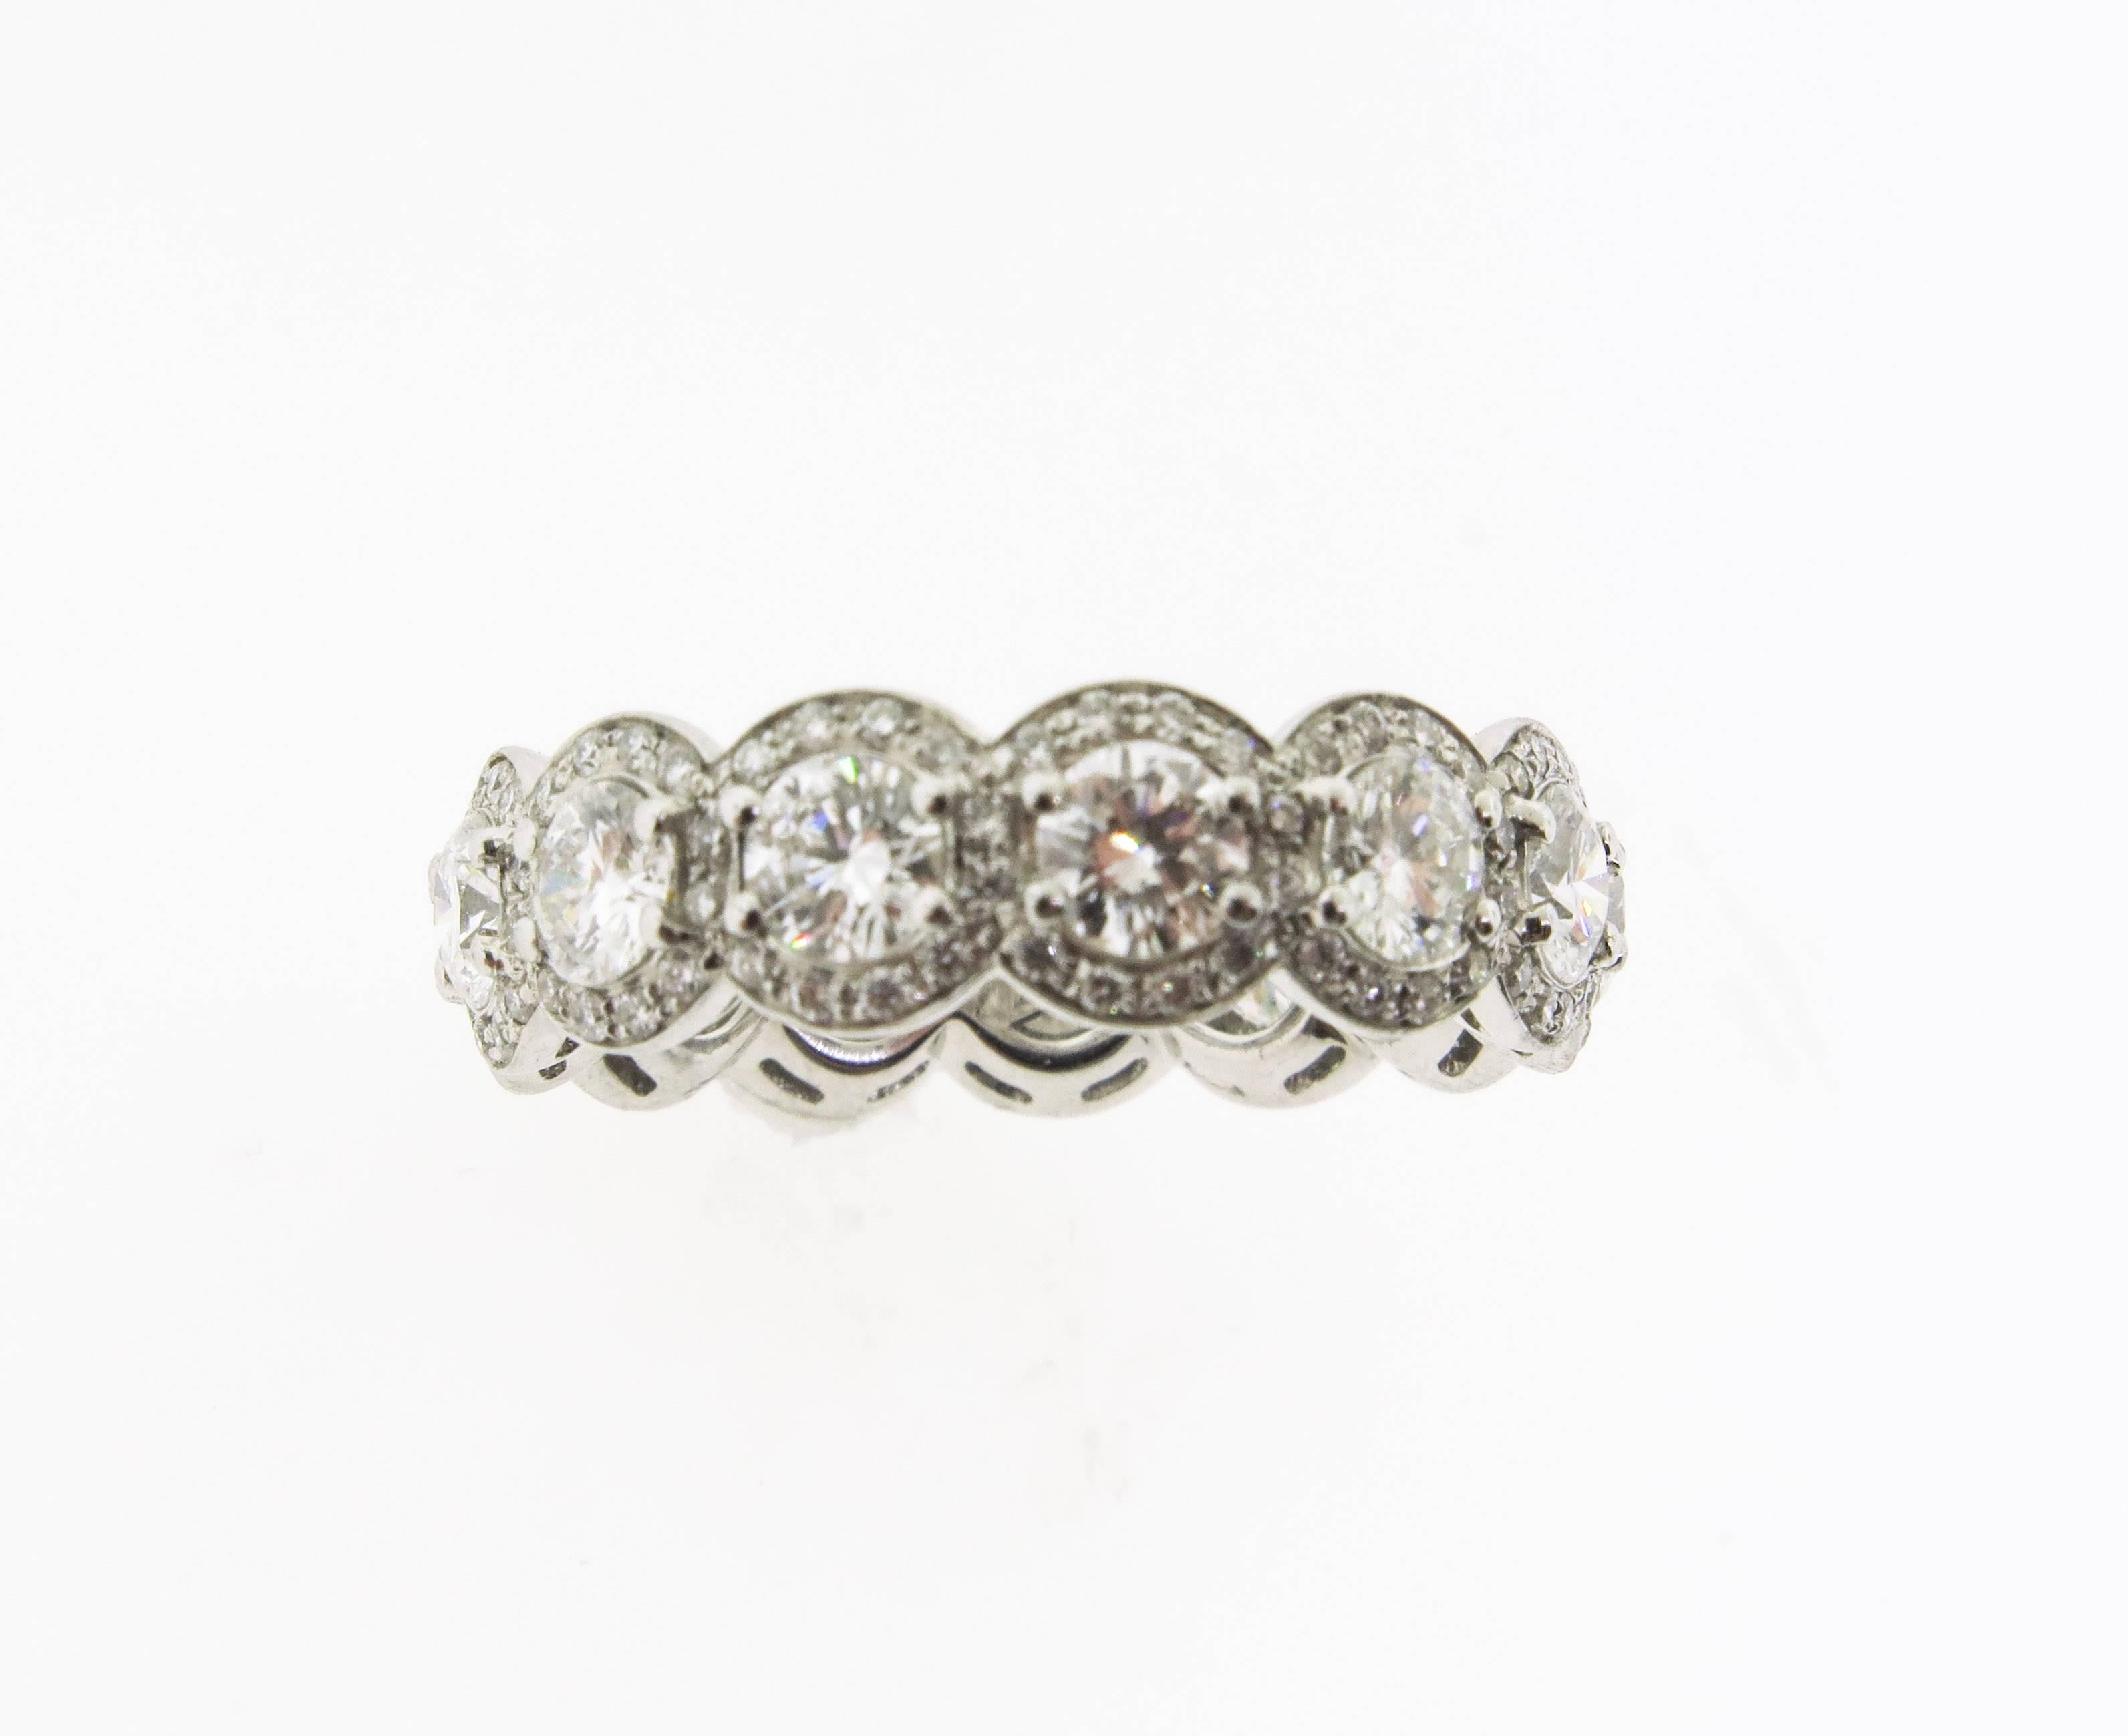 This stunning handmade white gold eternity band has 13 round cut diamonds totaling 2.99 cts. with a G color and SI1 clarity. It is a timeless staple piece of luxury jewelry that every woman will want to wear for an eternity, as it can be worn for